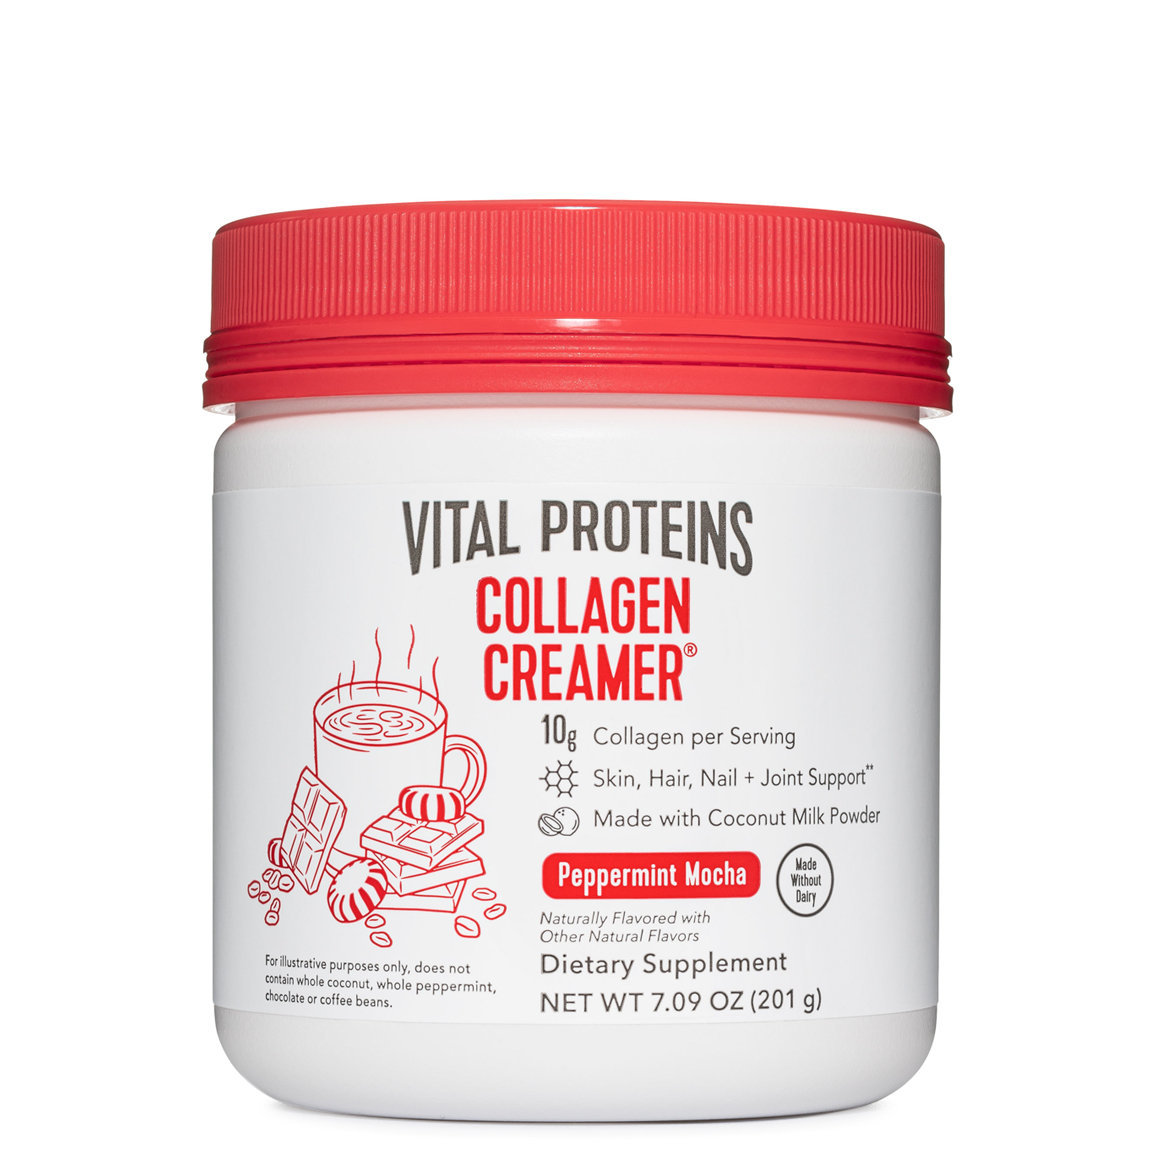 Vital Proteins Collagen Creamer - Peppermint Mocha alternative view 1 - product swatch.